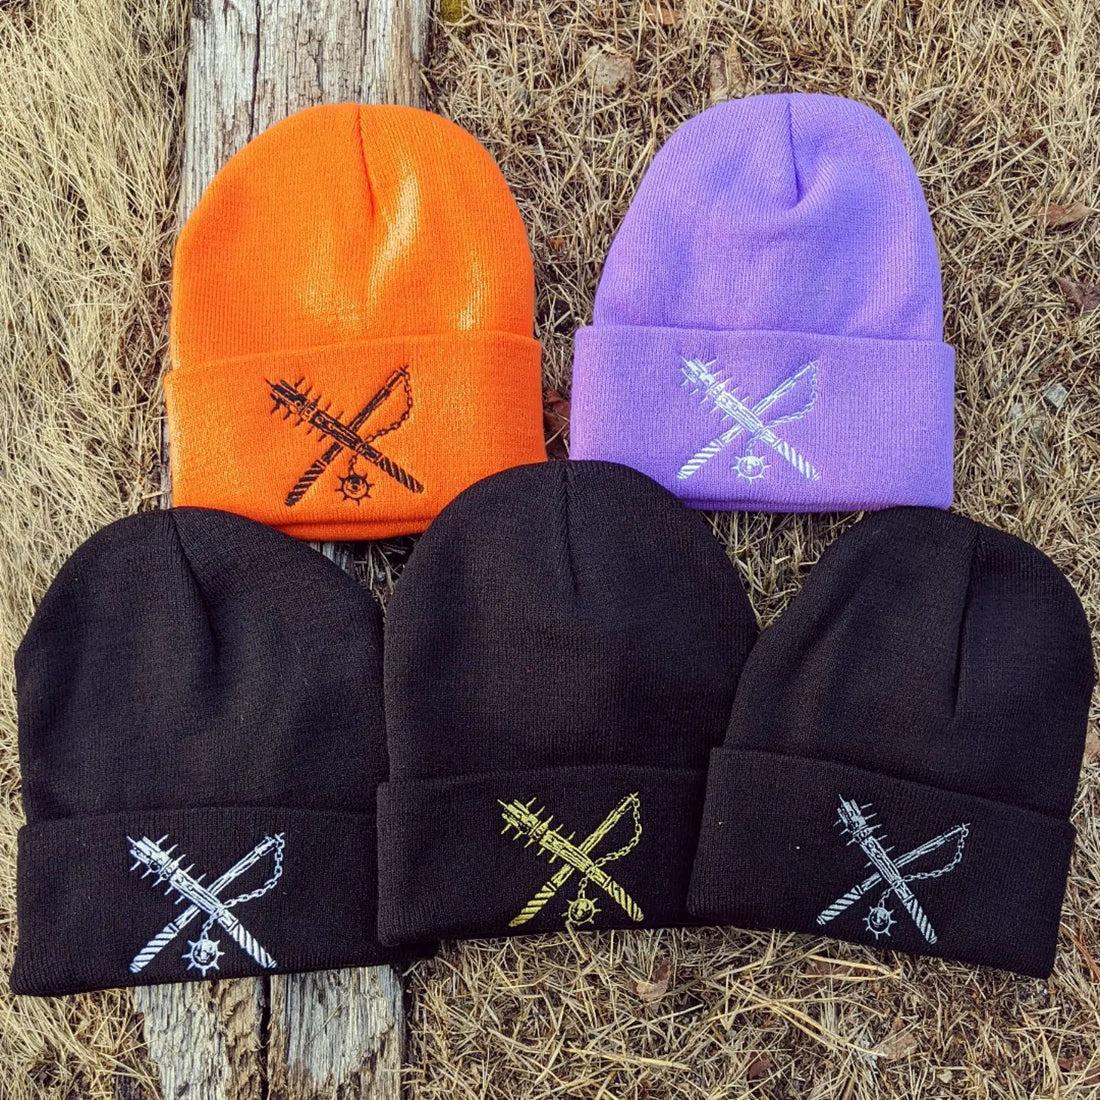 In stock now ⚔️ our signature Weapons logo embroidered beanies